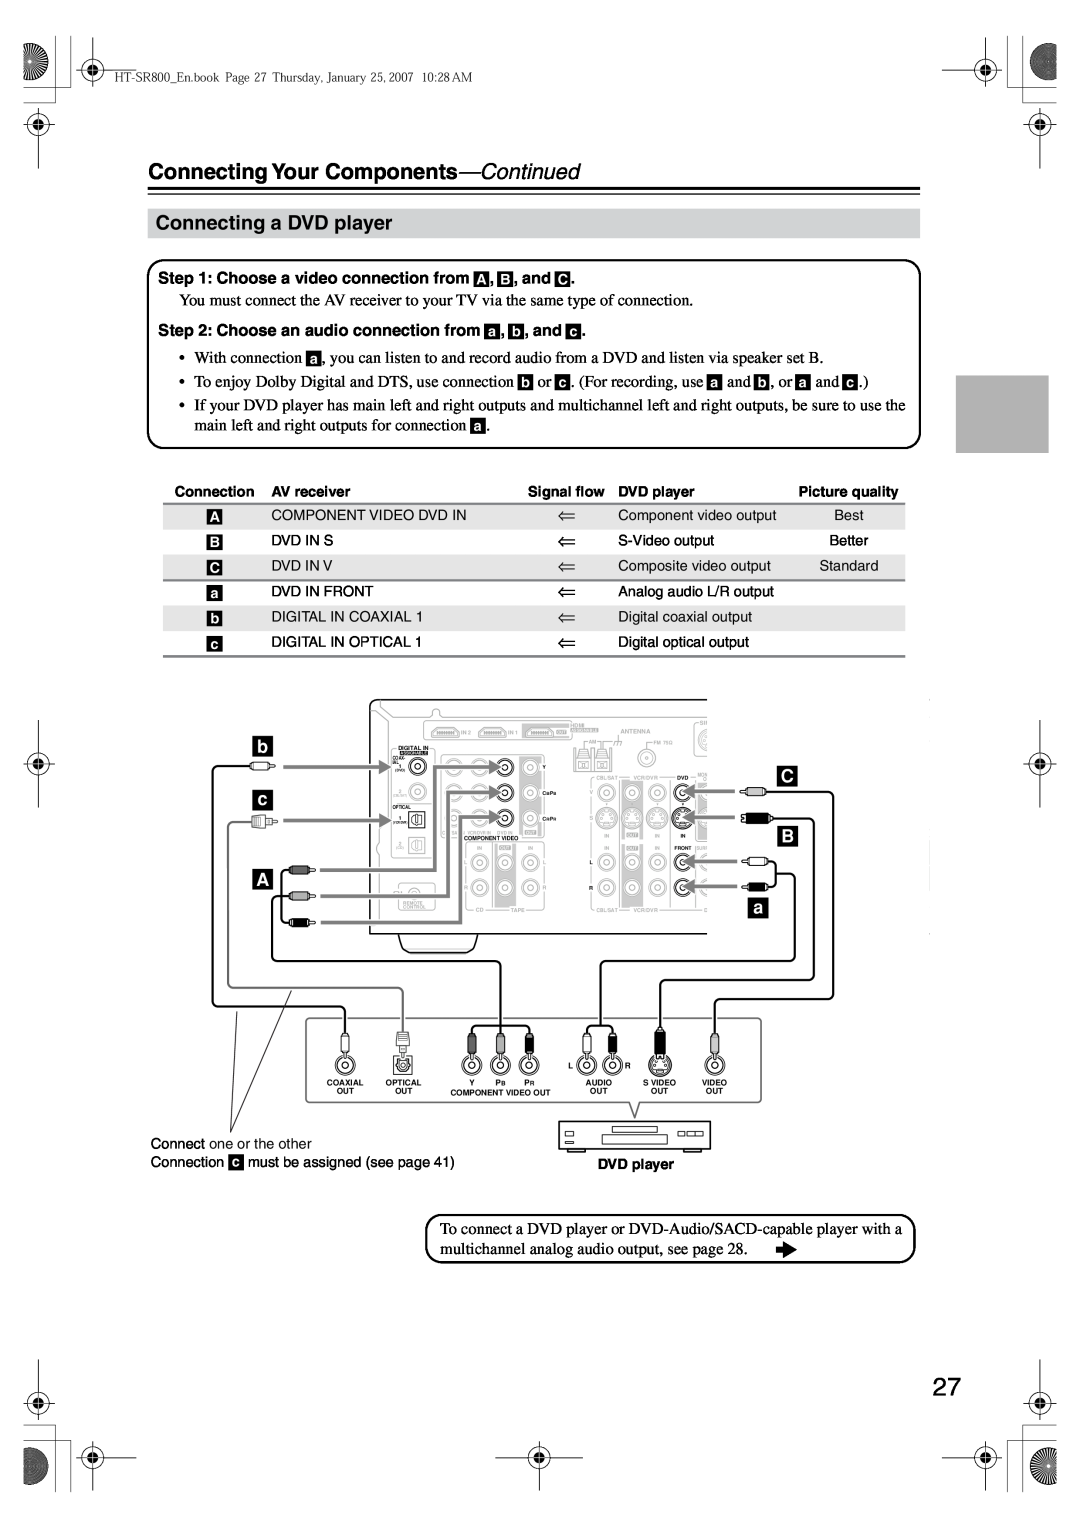 Onkyo HT-SR800 instruction manual Connecting a DVD player, Connecting Your Components-Continued 